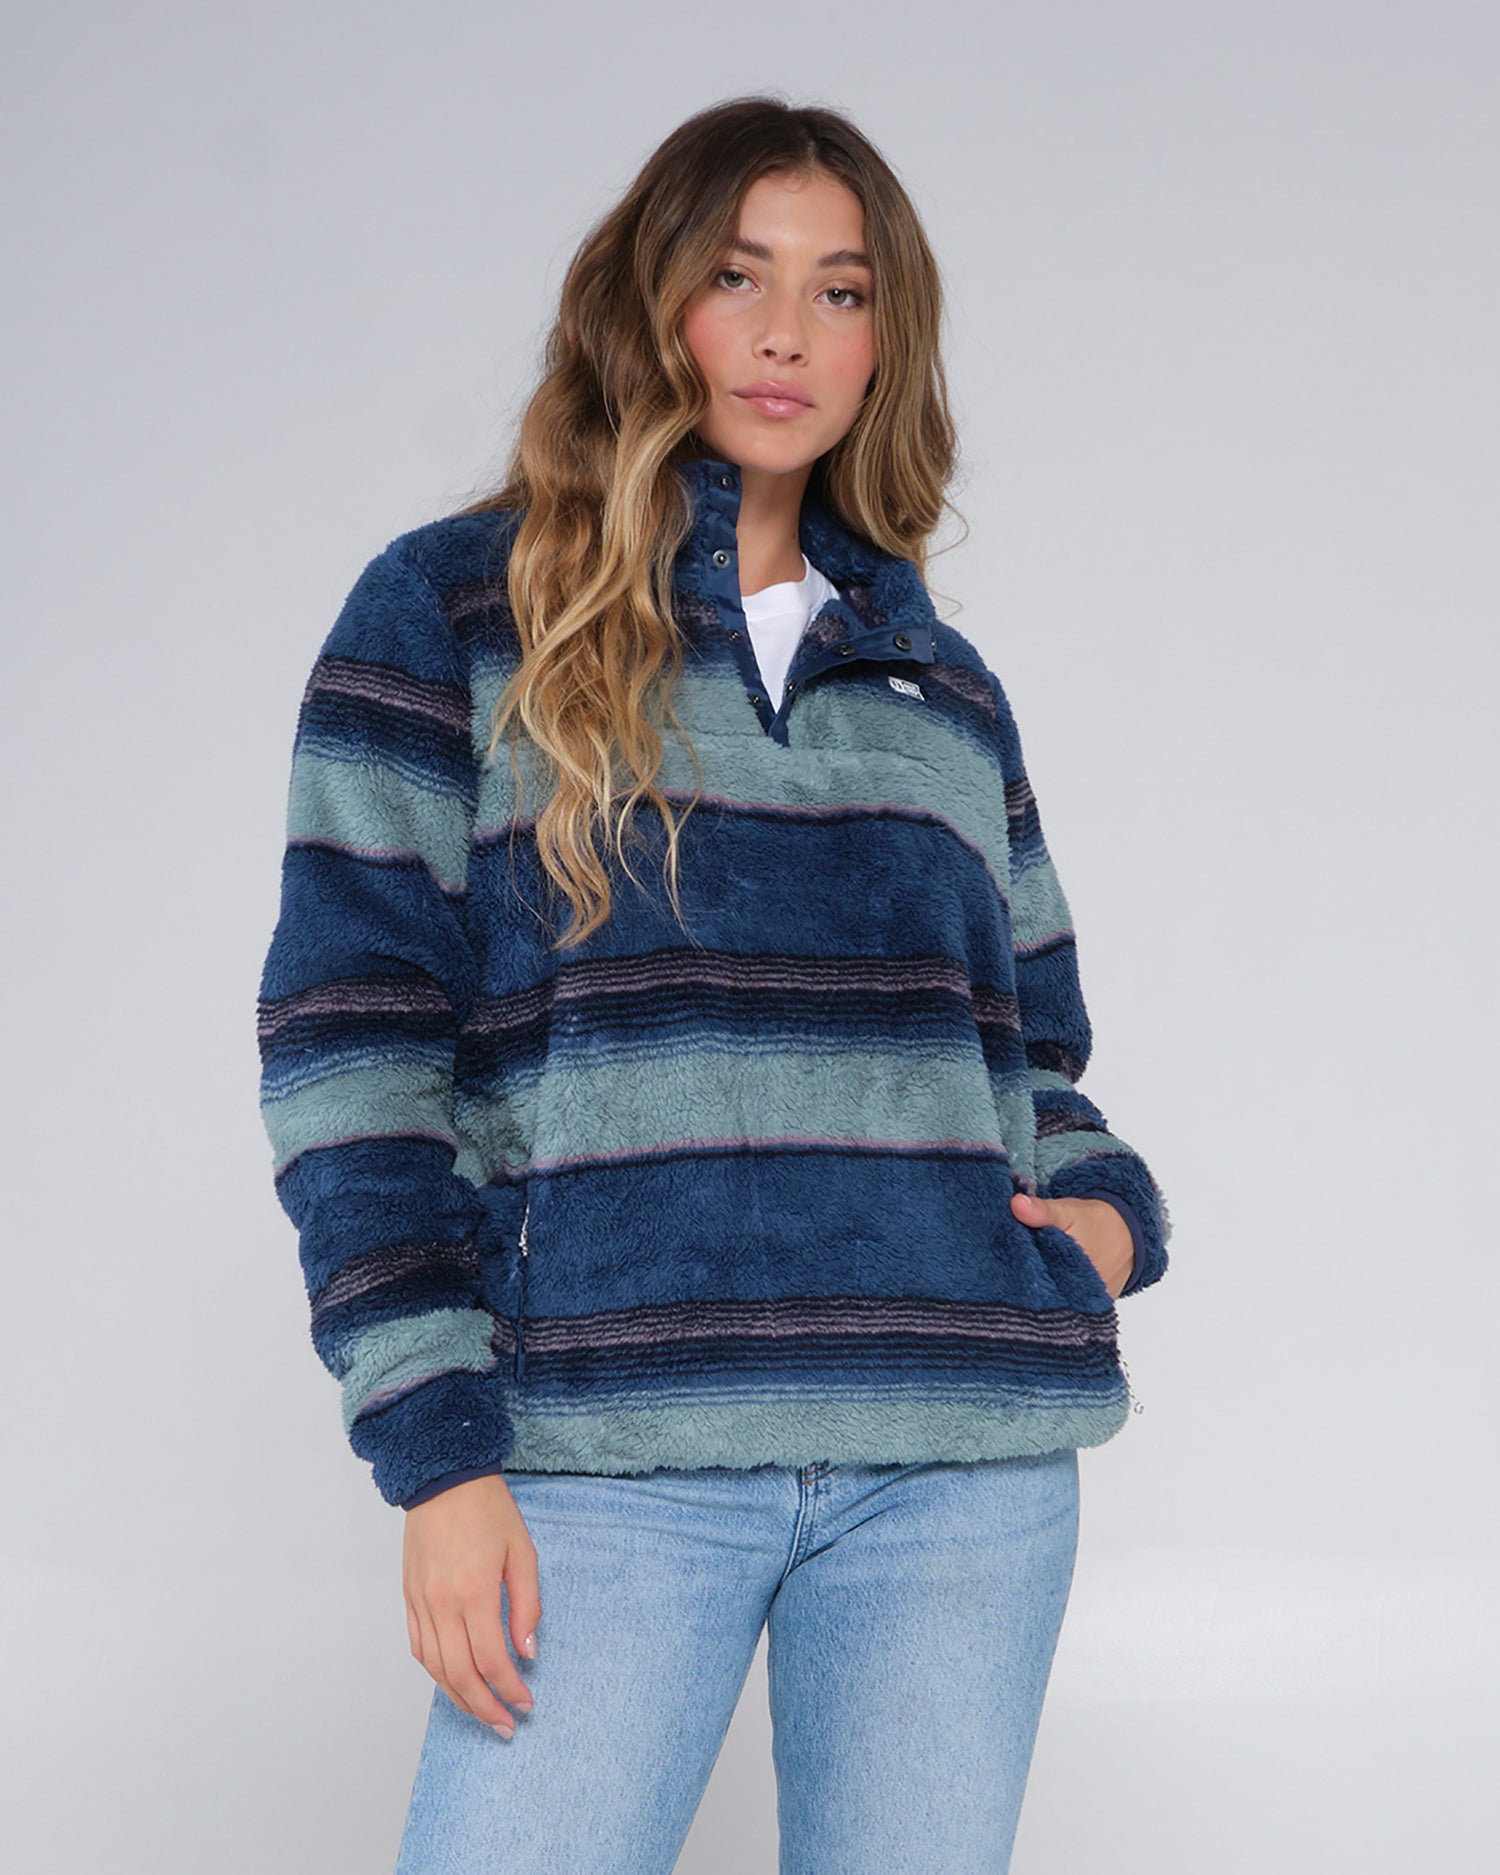 On body front of the Calm Seas Blue Steel Pullover